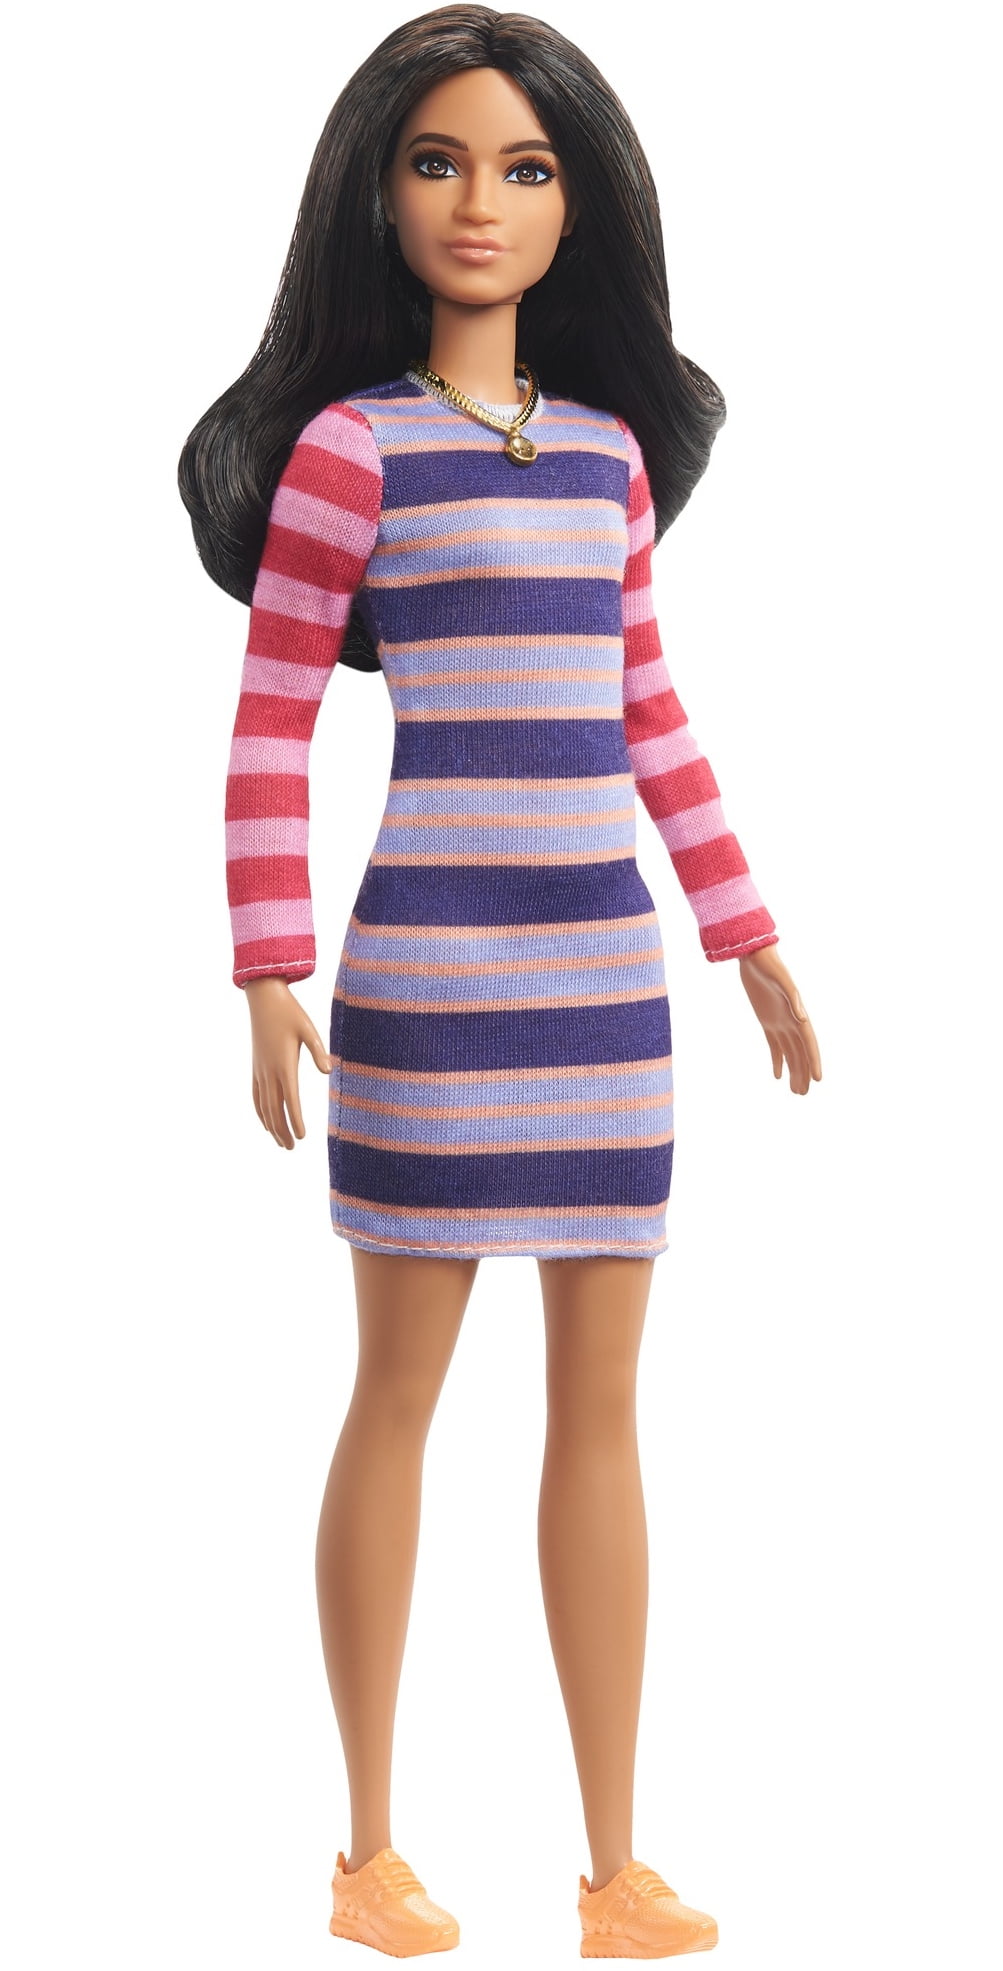 Barbie Fashionistas Doll #147 With Long Brunette Hair & Striped Dress 